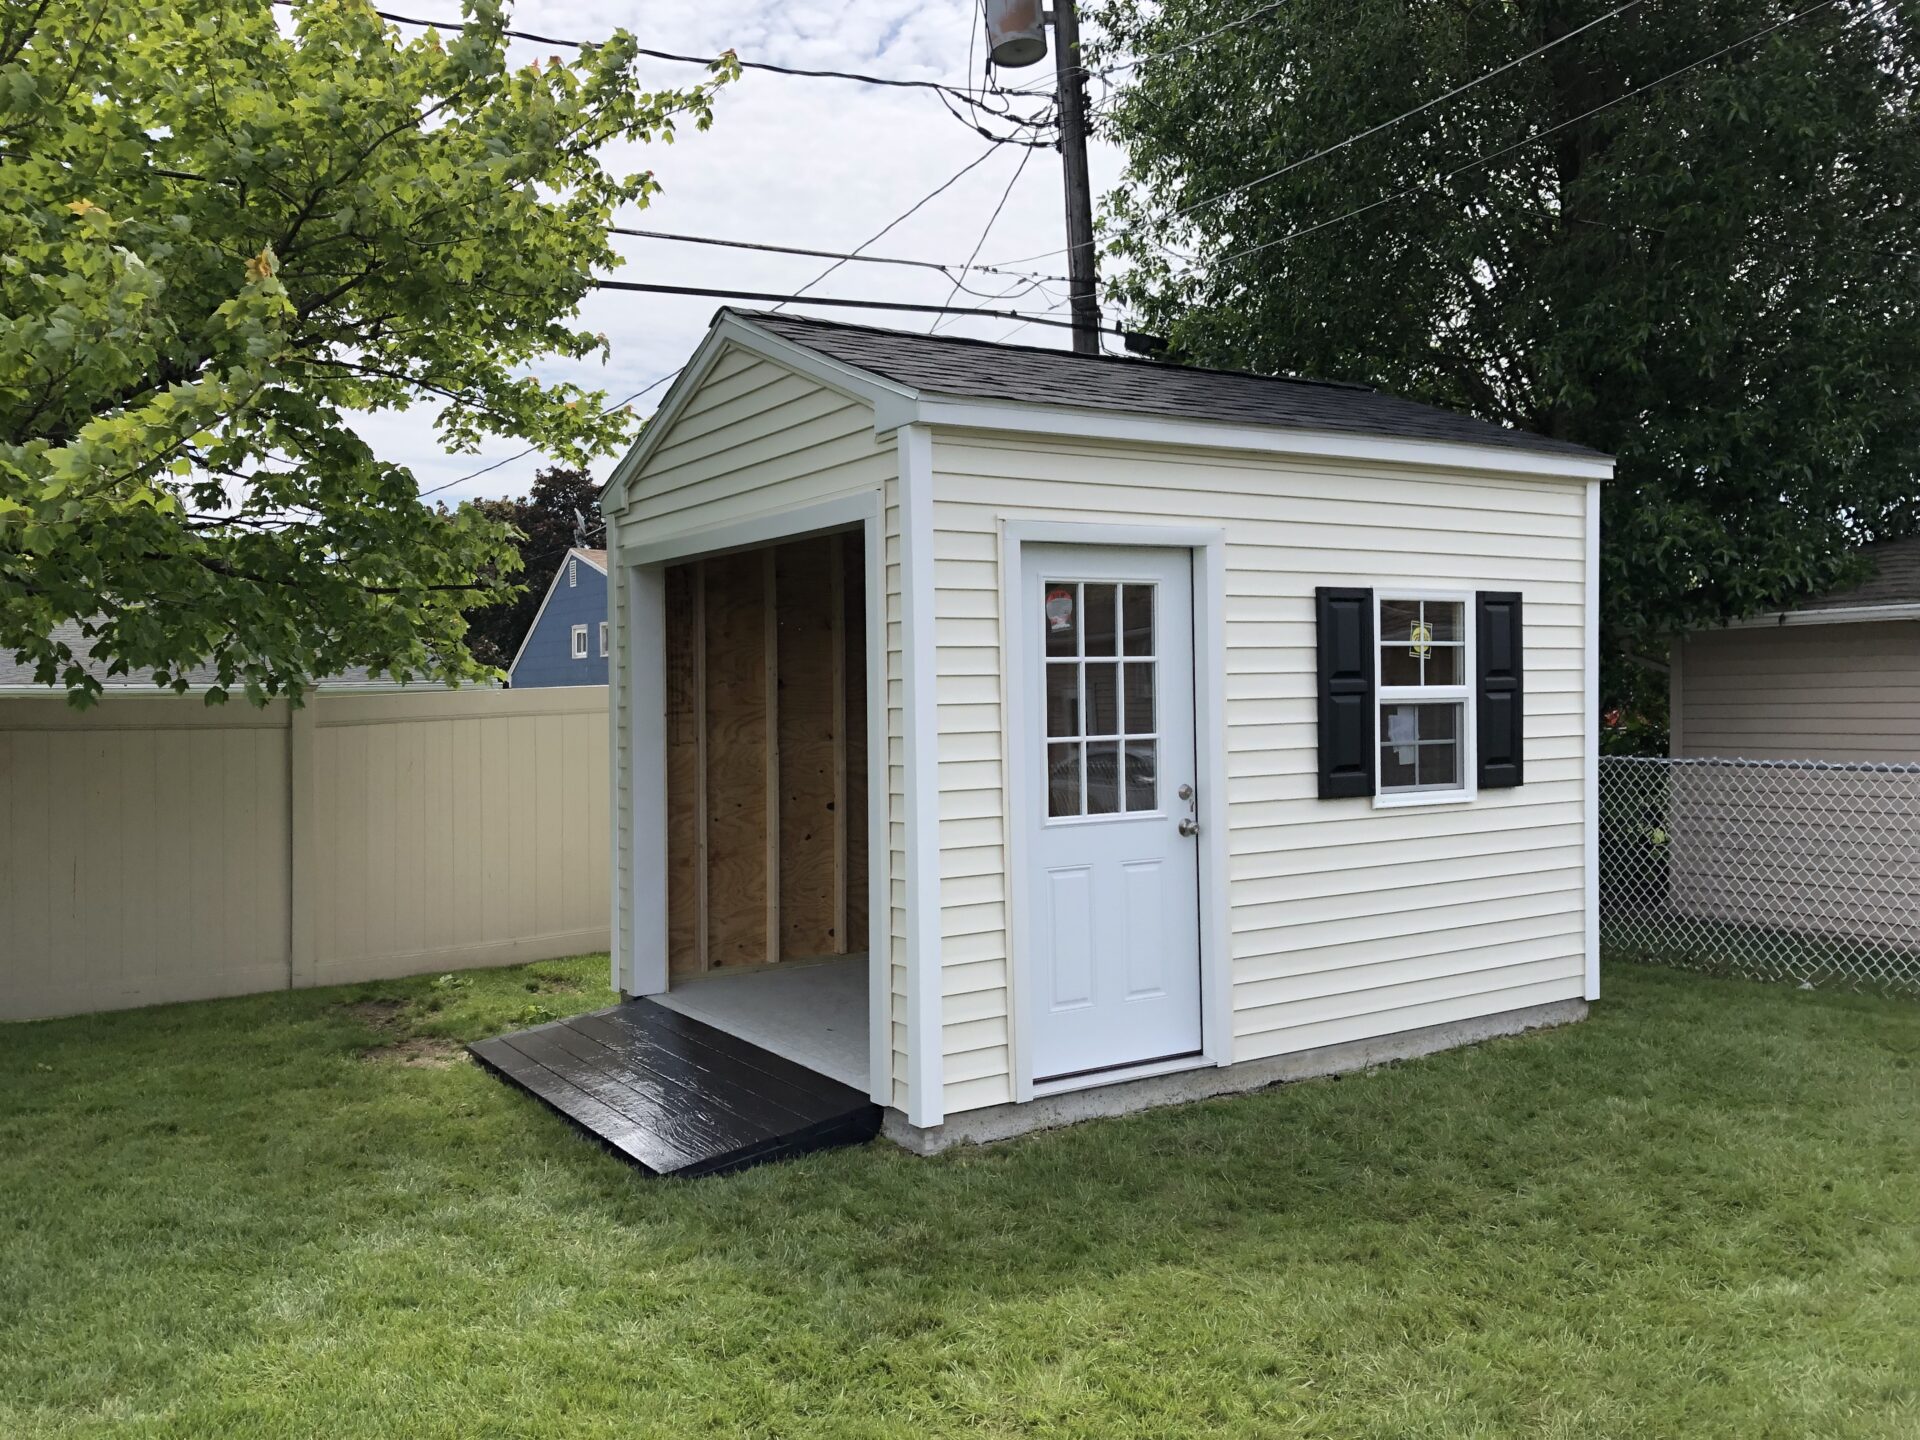 A white shed with black shutters and a ramp.